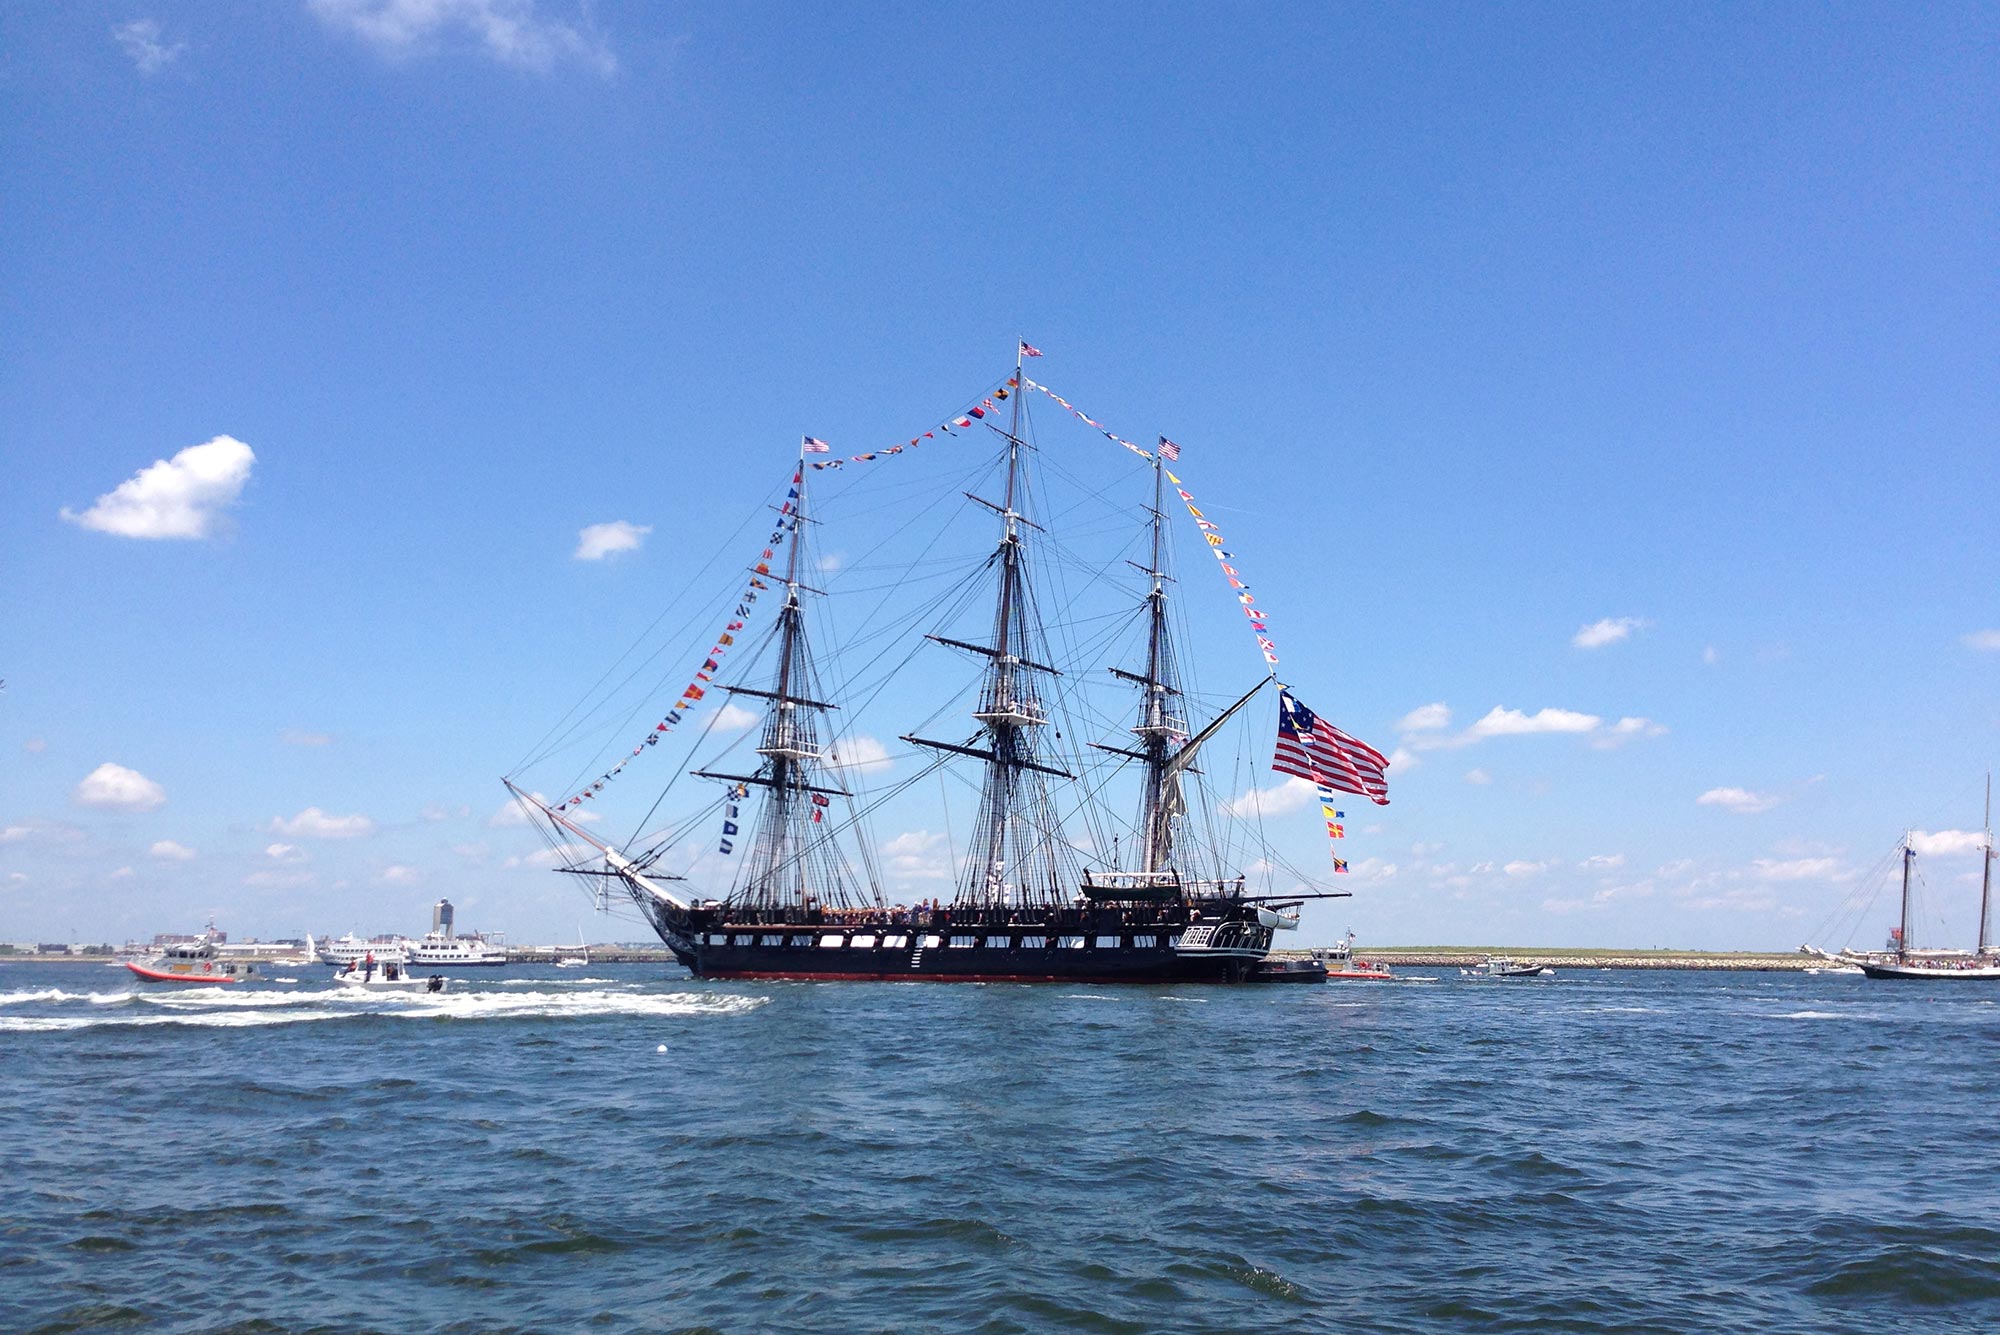 Photo of the USS Constitution (also known as “Old Ironsides”) in the harbor on a summer day with a few small clouds in the sky. The ship is decorated for the fourth.